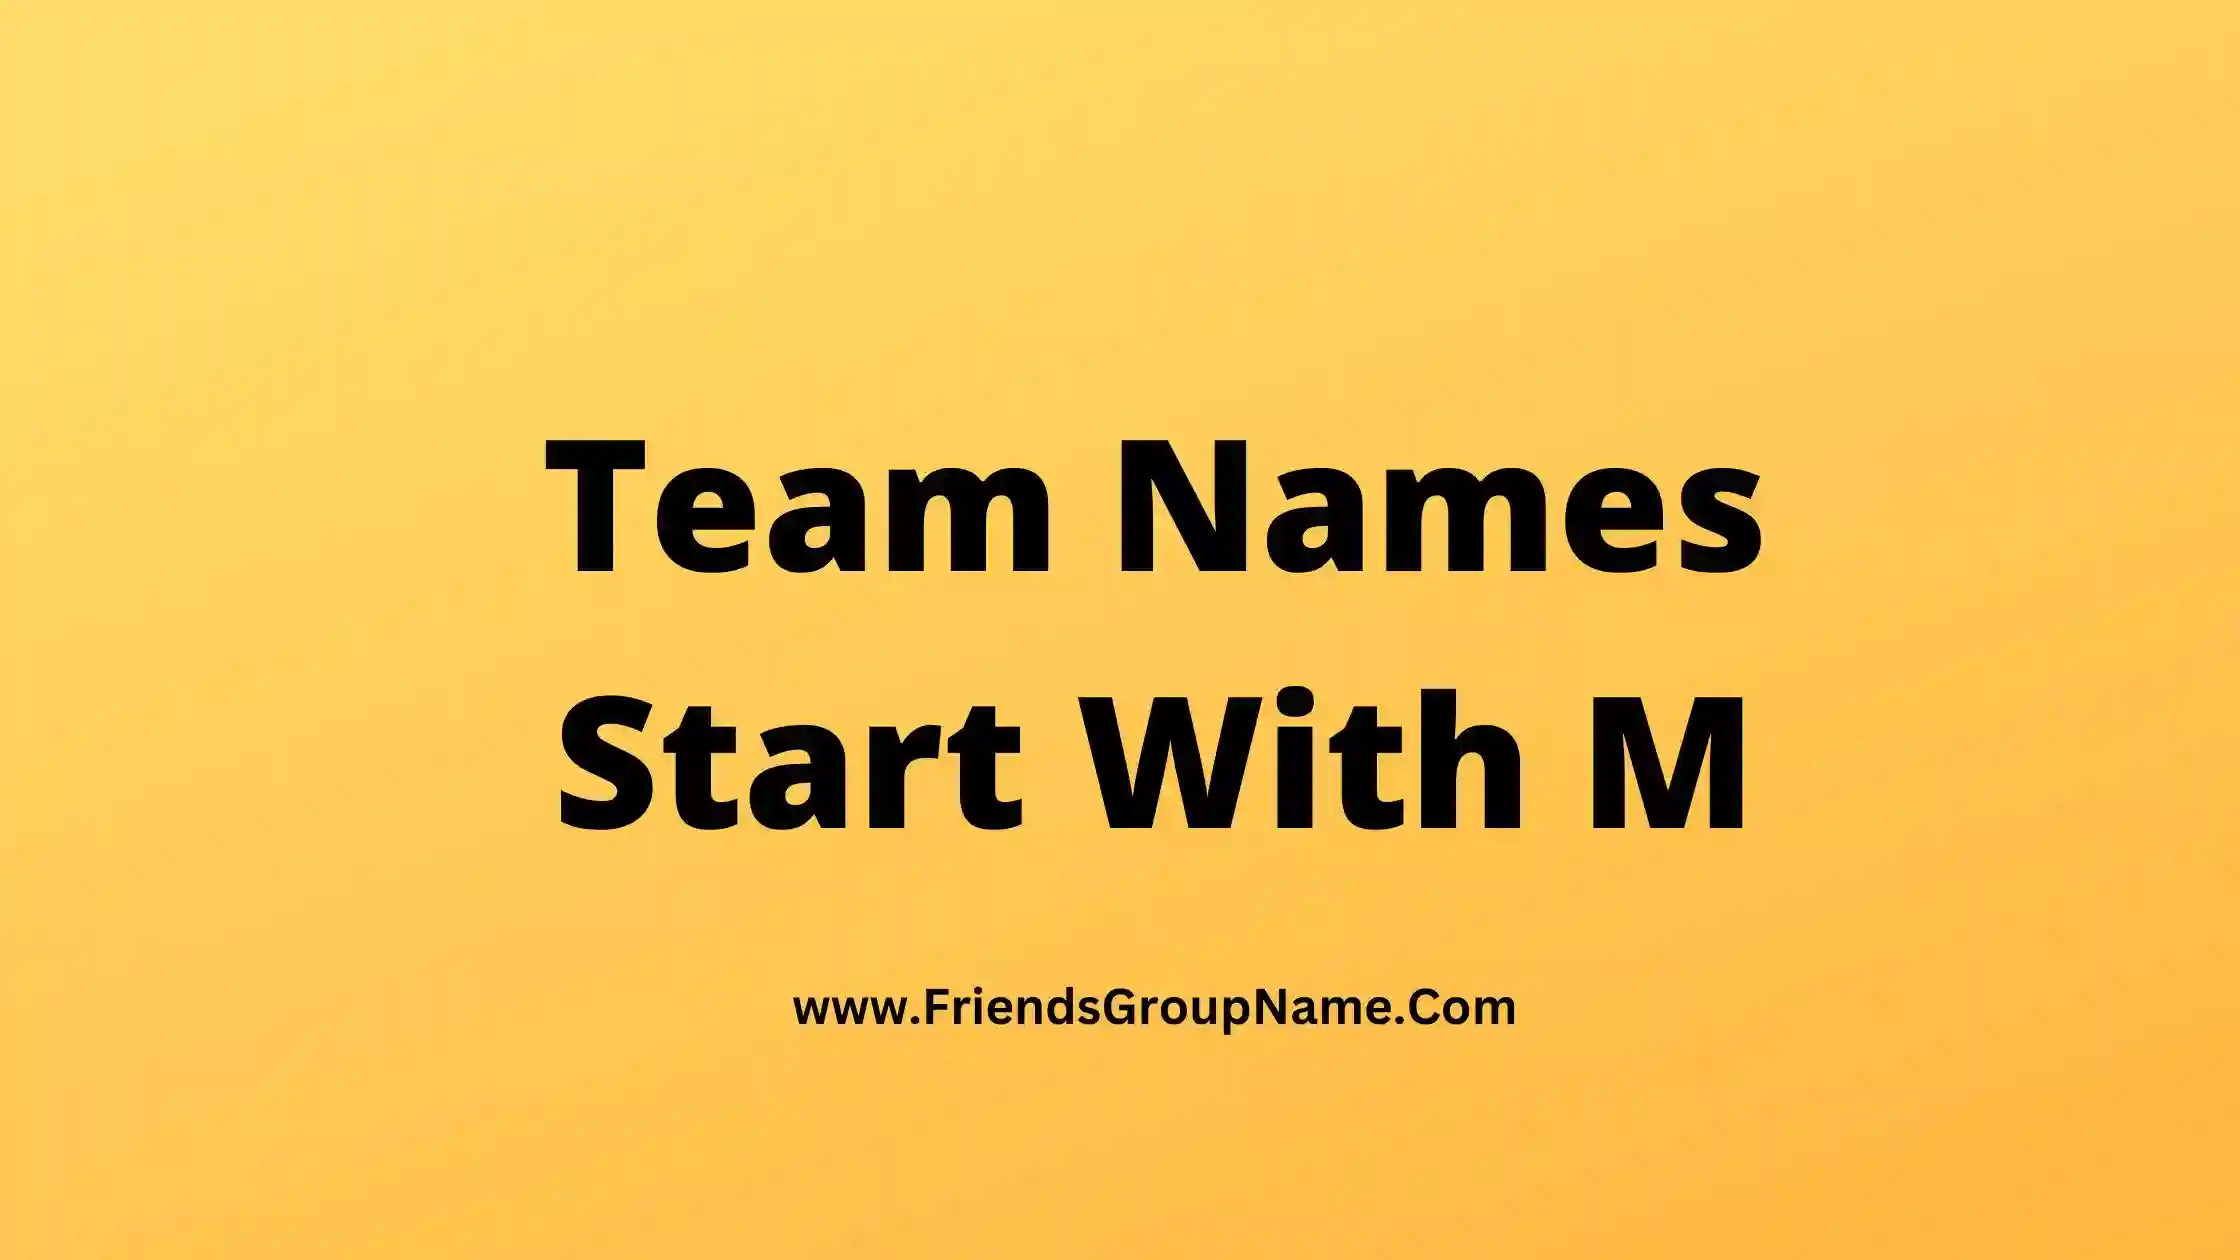 Team Names Start With M